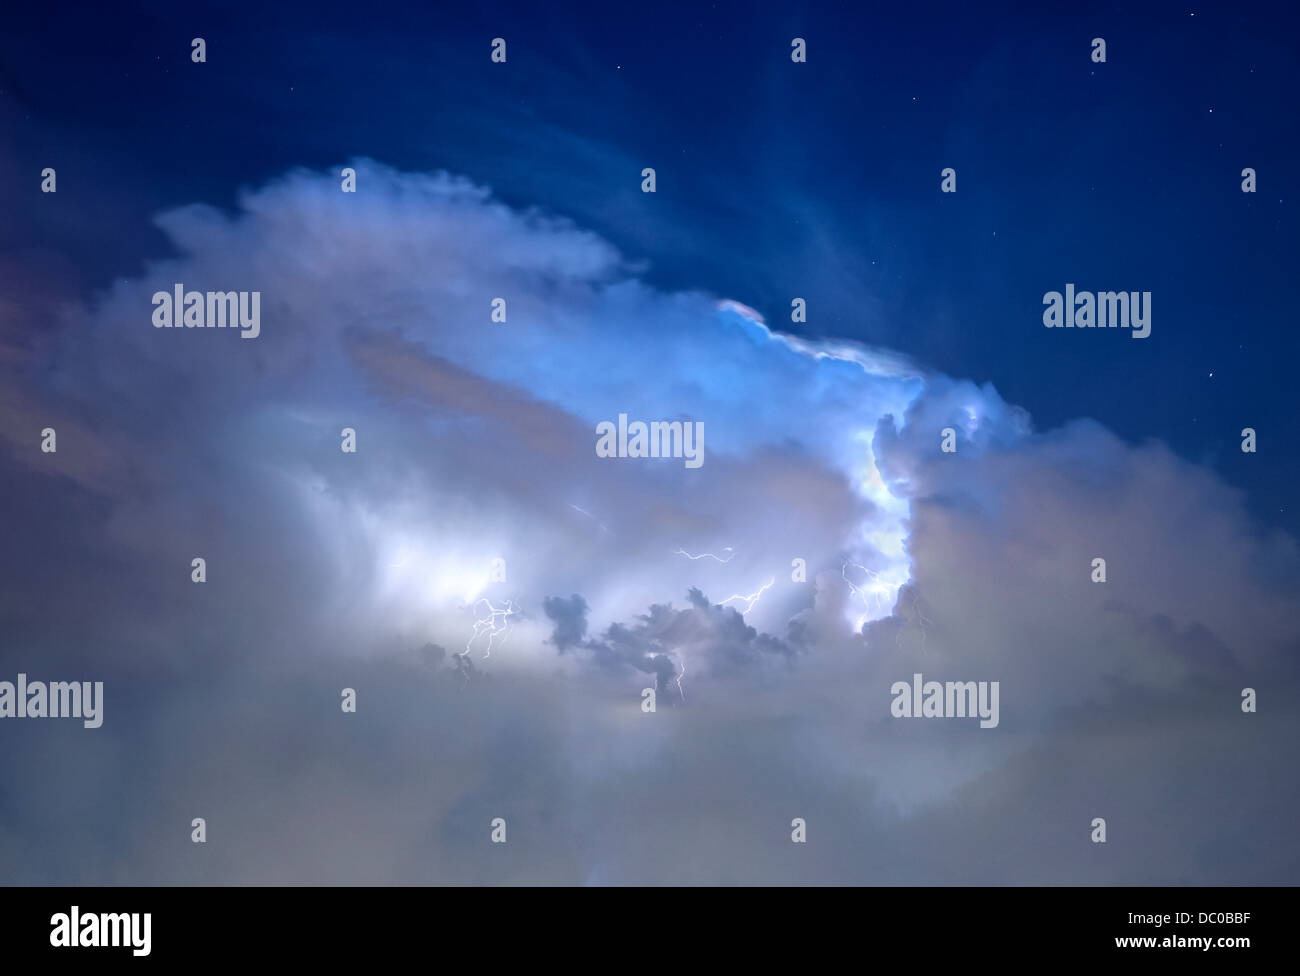 Thunderstorm Clouds With Lightning Stock Photo